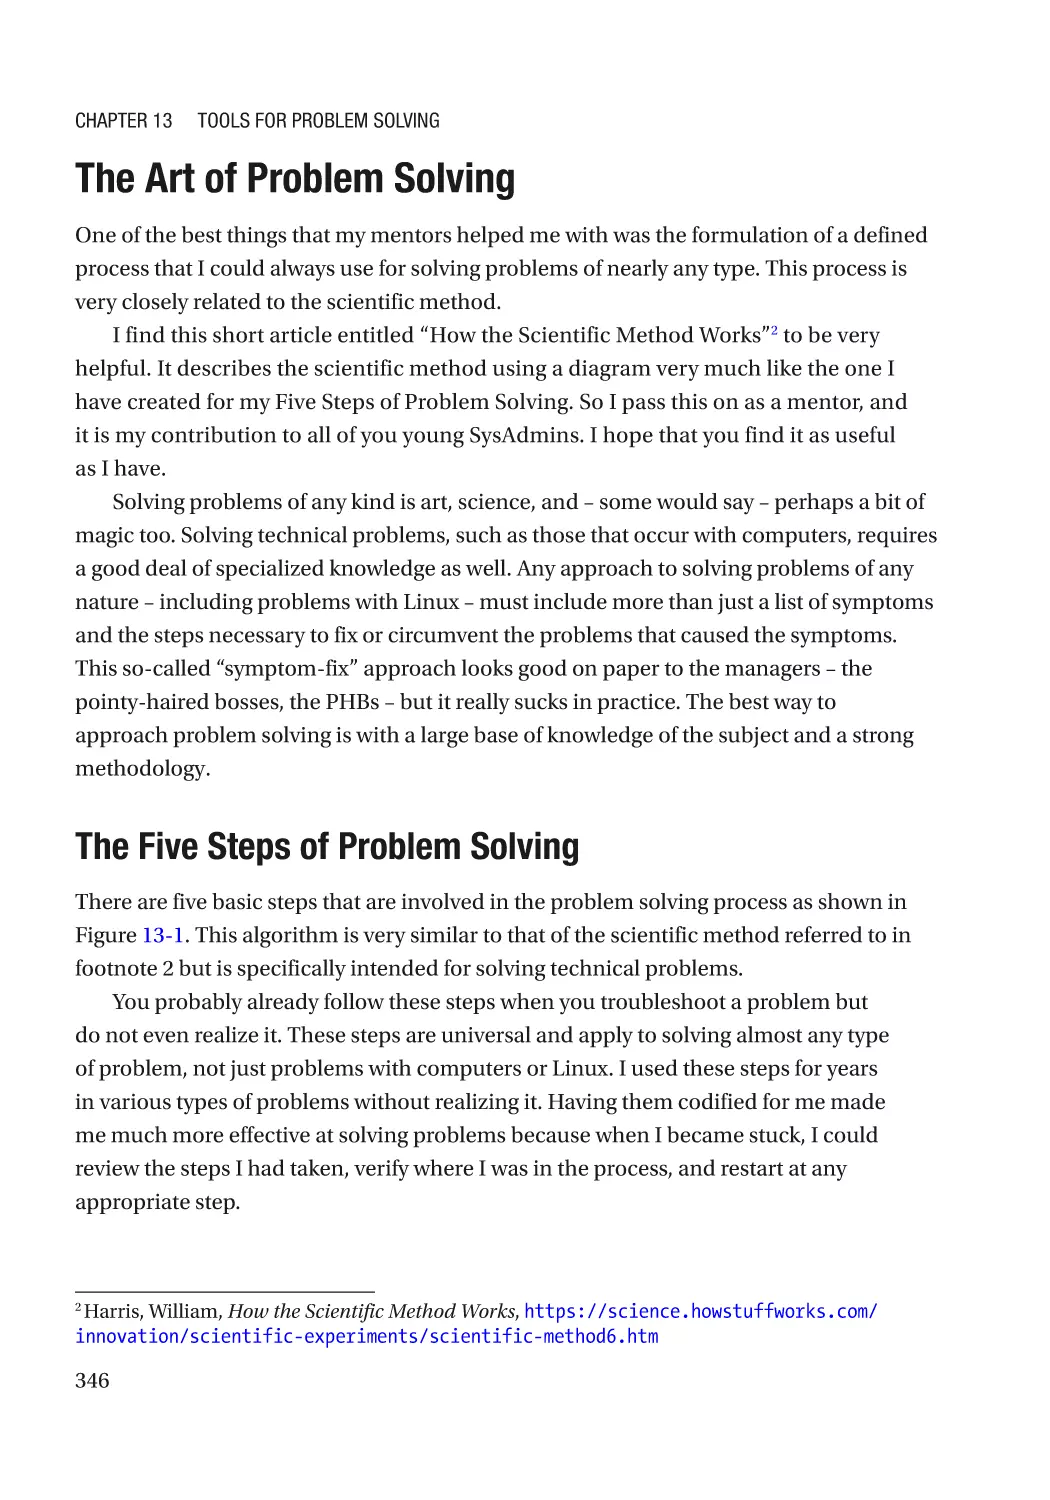 The Art of Problem Solving
The Five Steps of Problem Solving